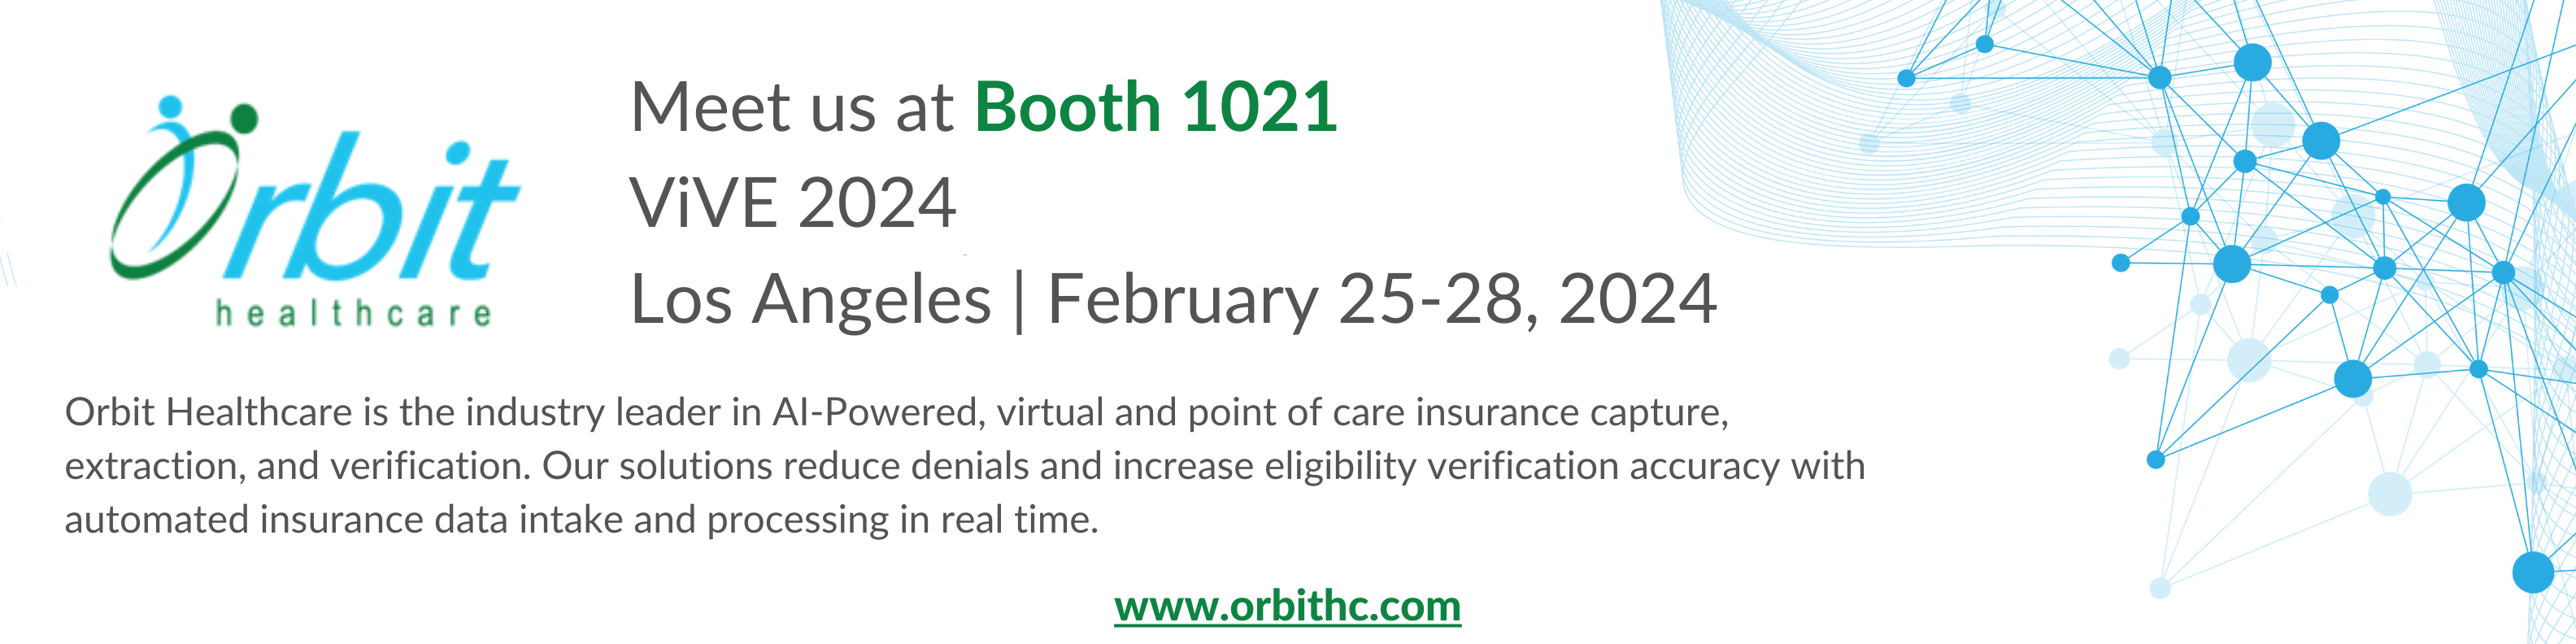 Orbit Healthcare at ViVE 2024 Booth 1021